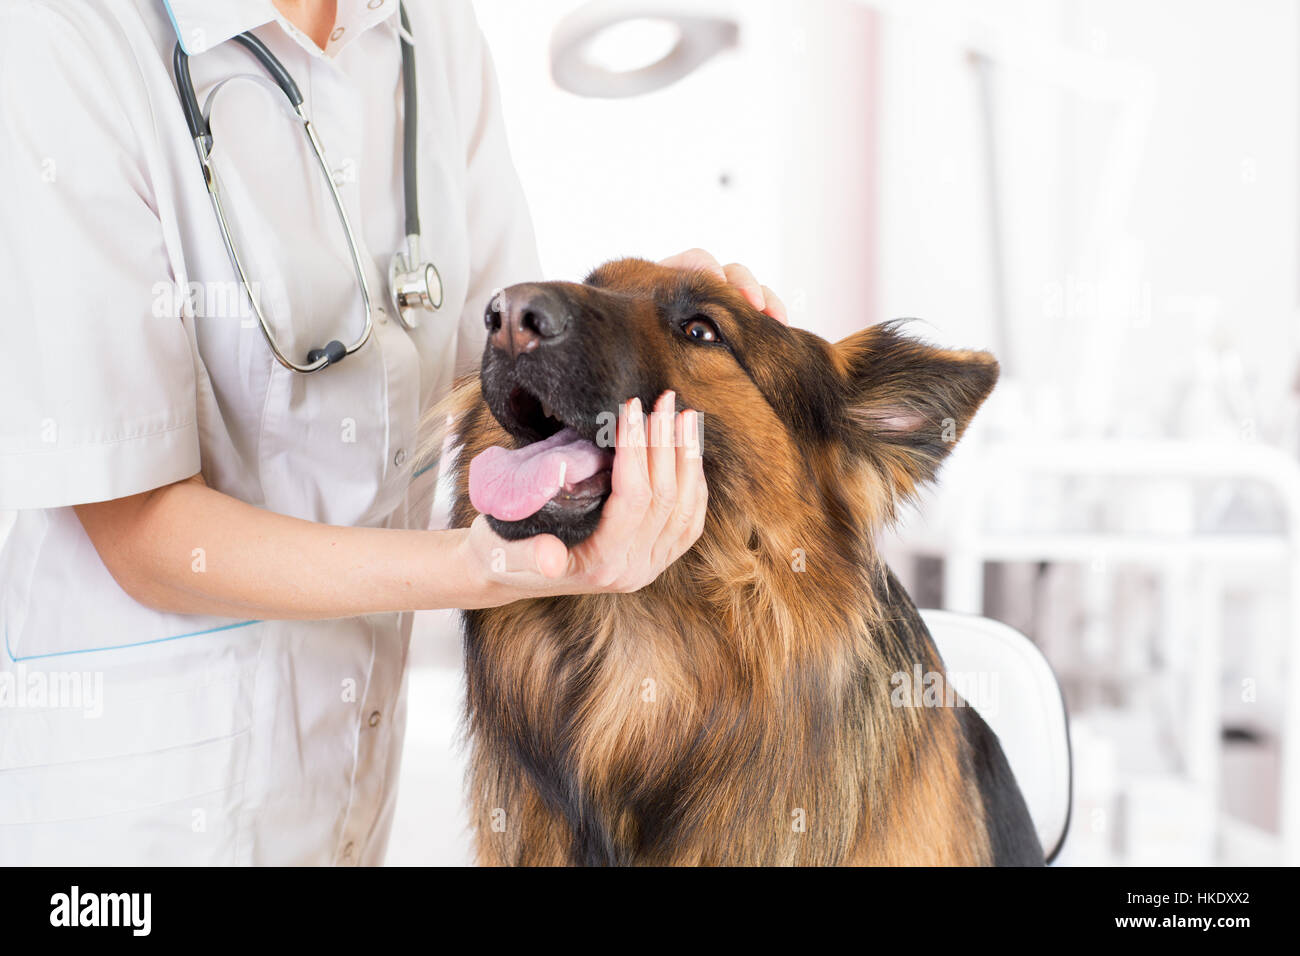 clinical dog examination by veterinary doctor in office Stock Photo